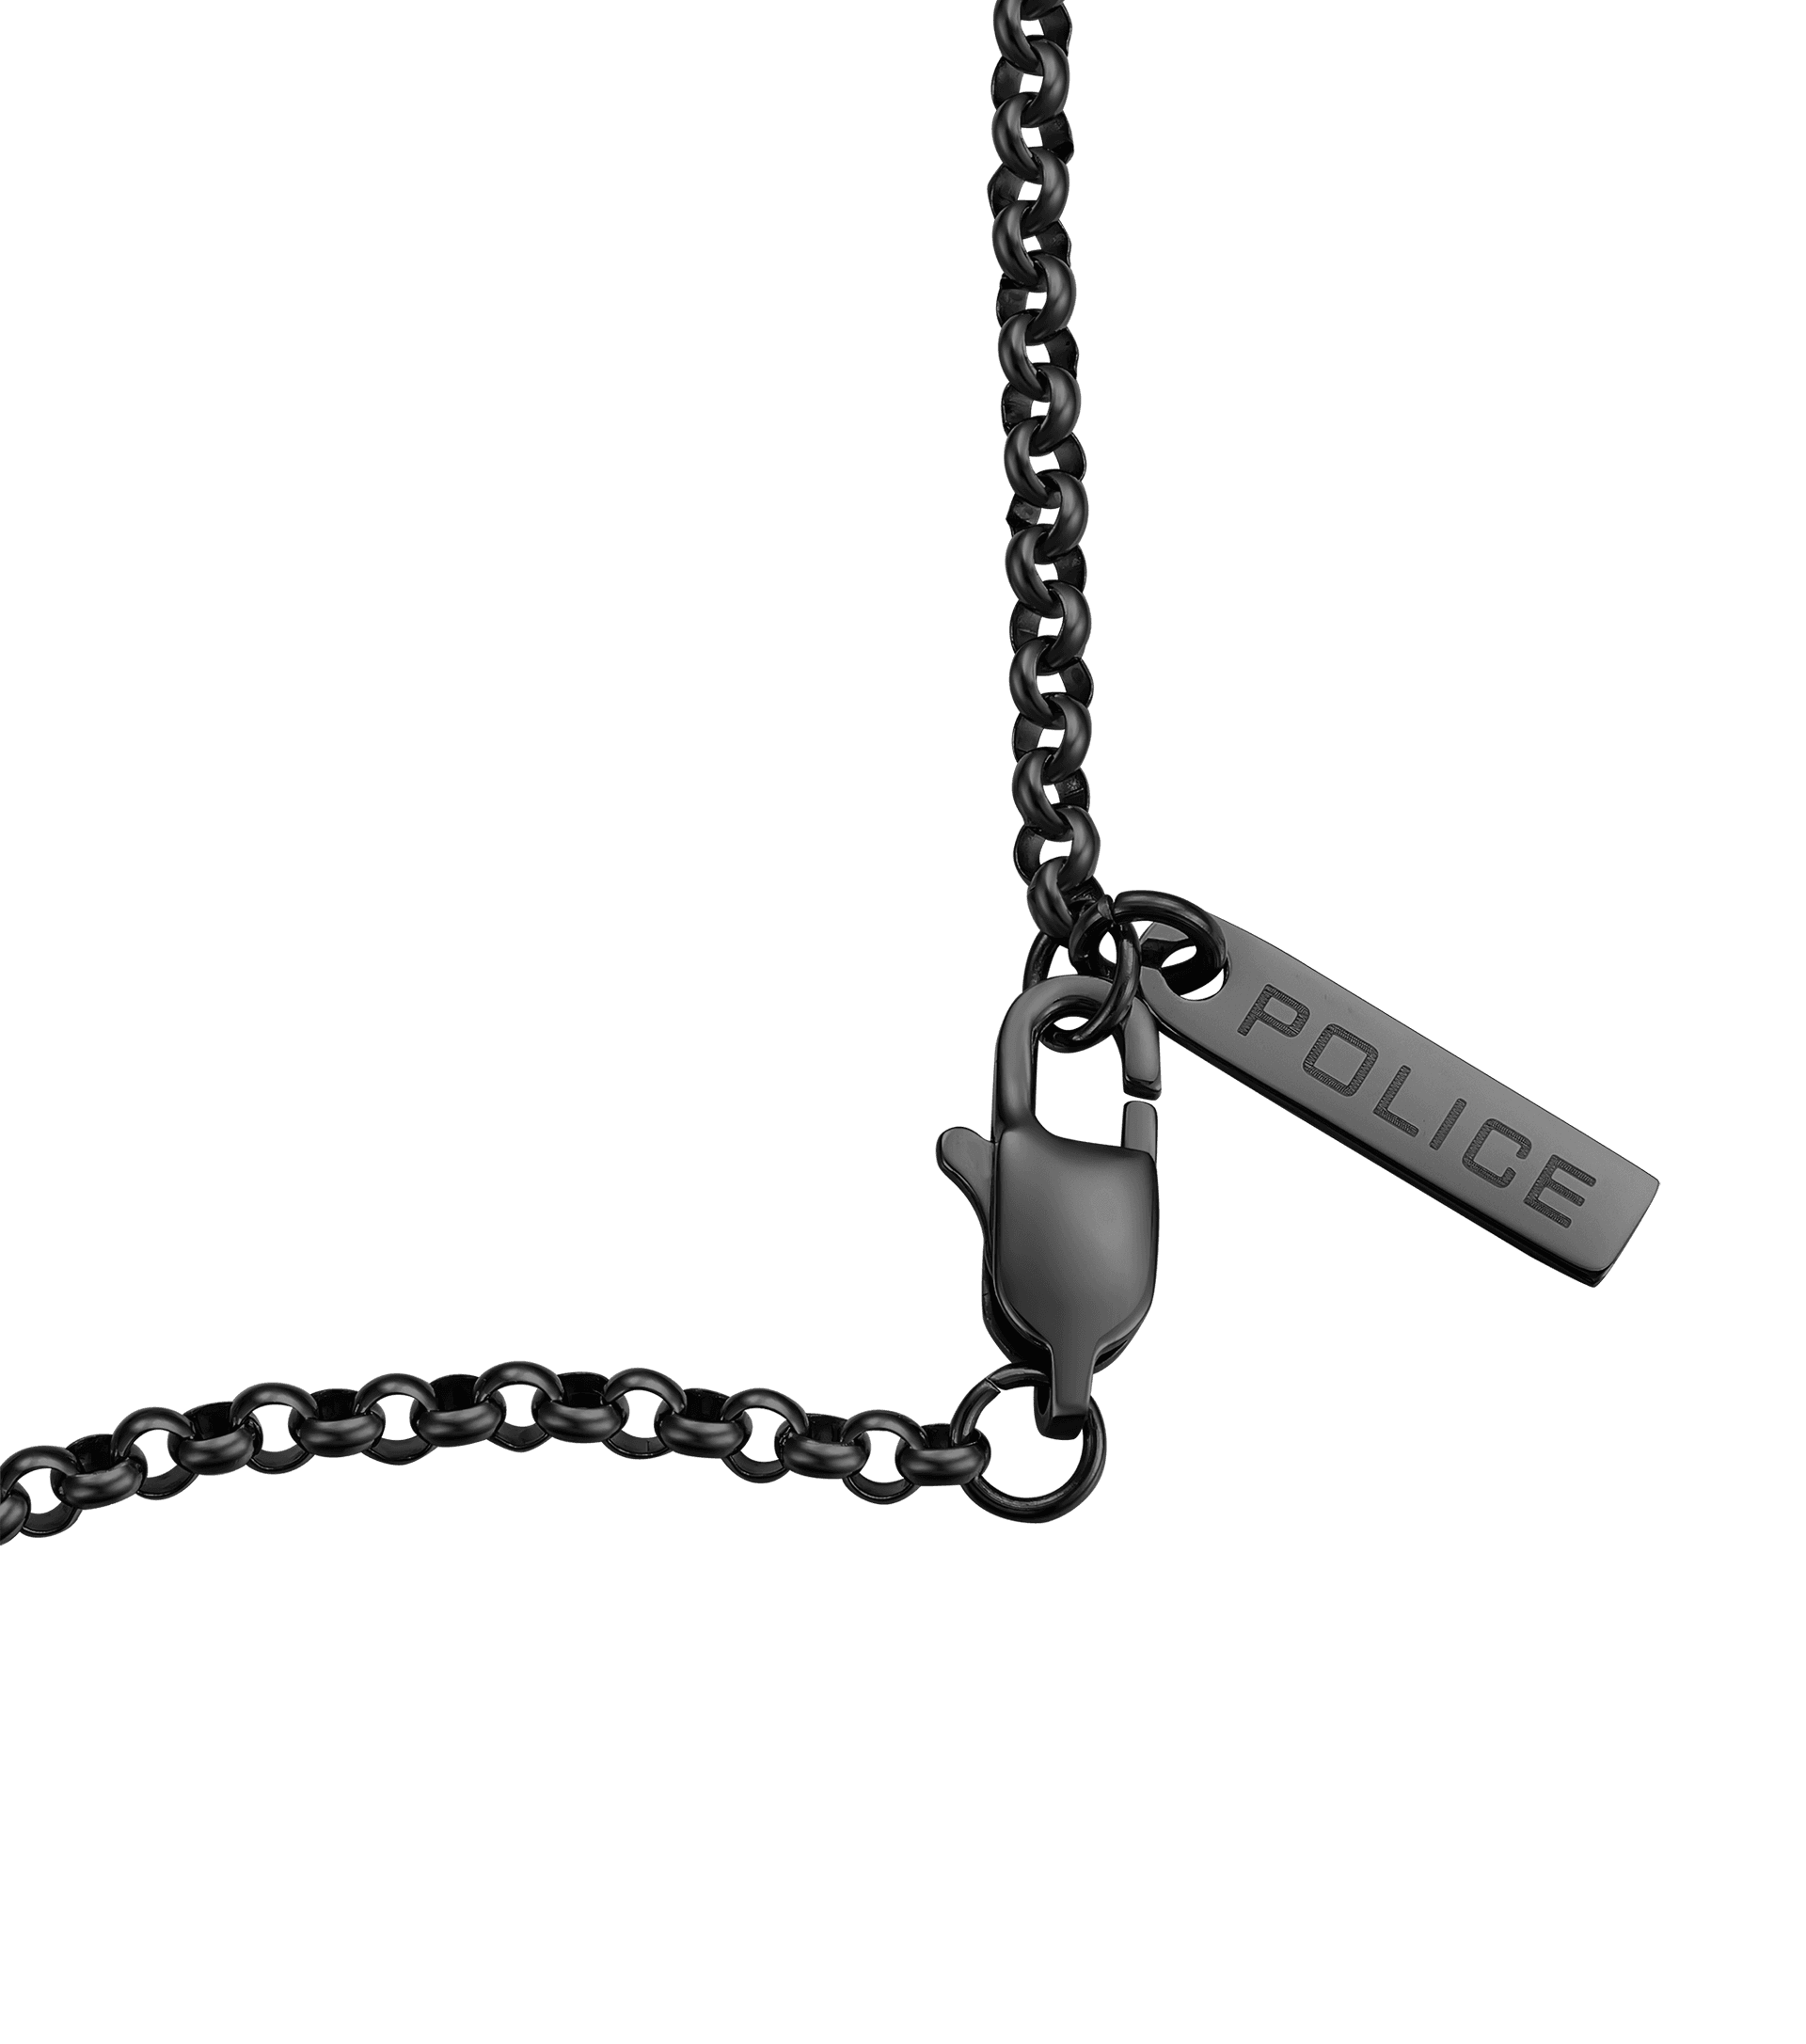 Police jewels - Tacoma PEAGN0010601 Police Necklace For II Men By